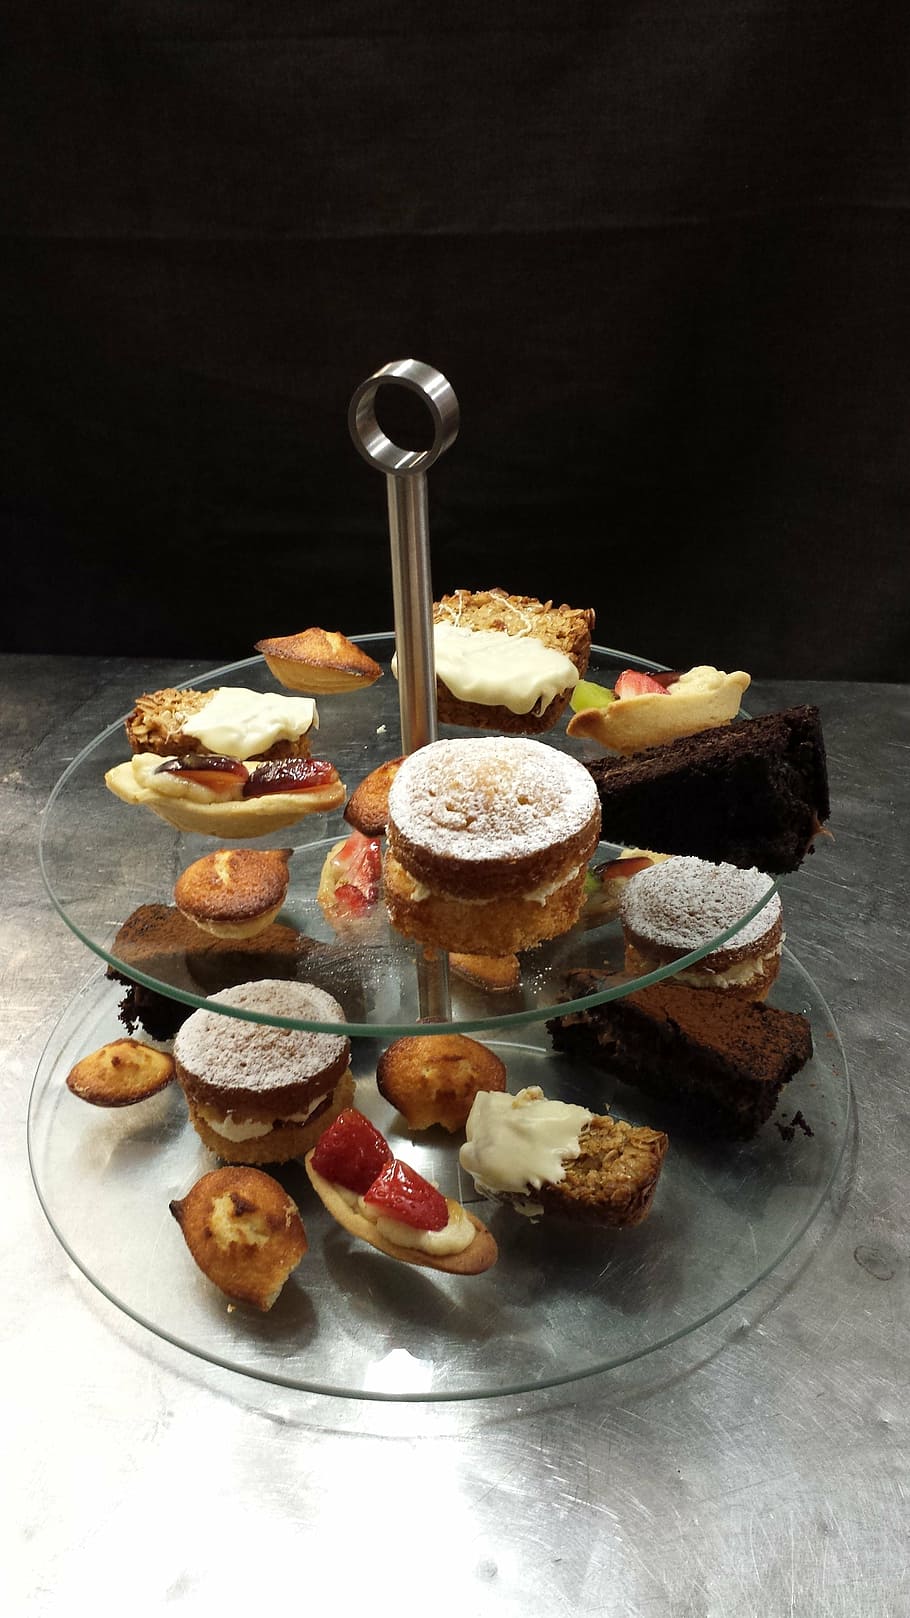 cakes, cakes on stand, afternoon tea, food, cakestand, cake-stand, sponge, afternoon, tea, elegant